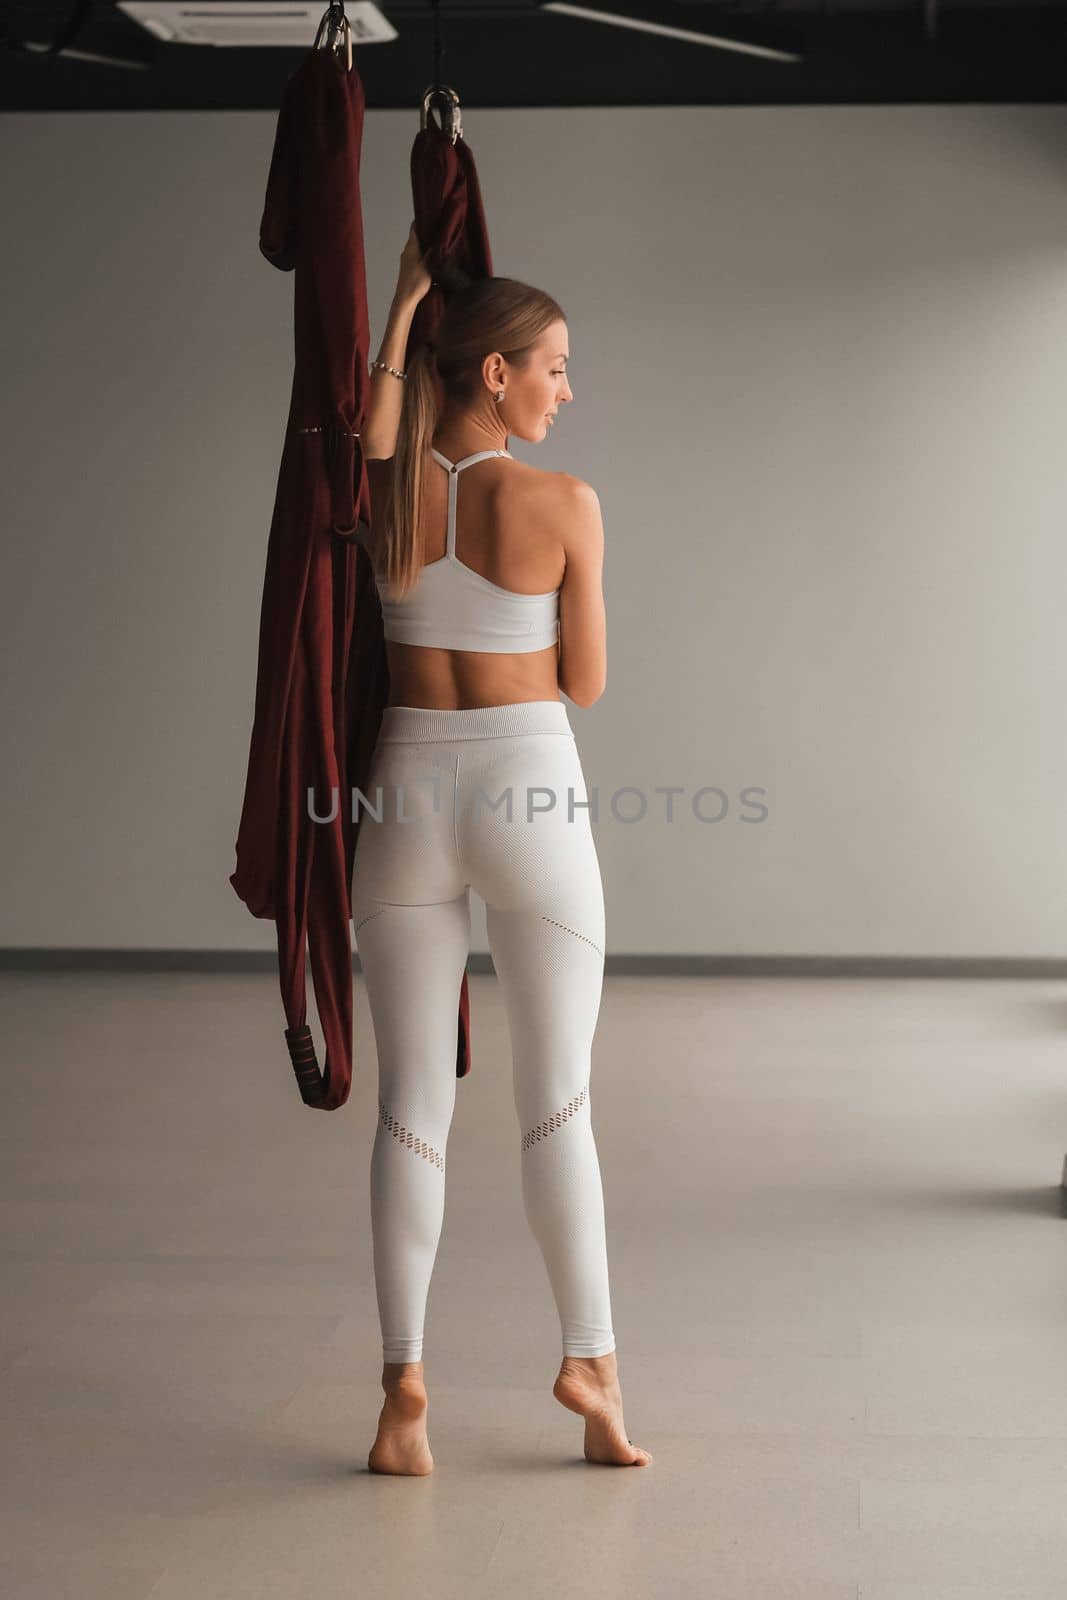 A portrait of a girl in white sportswear stands near a hanging Yoga hammock in the fitness room.